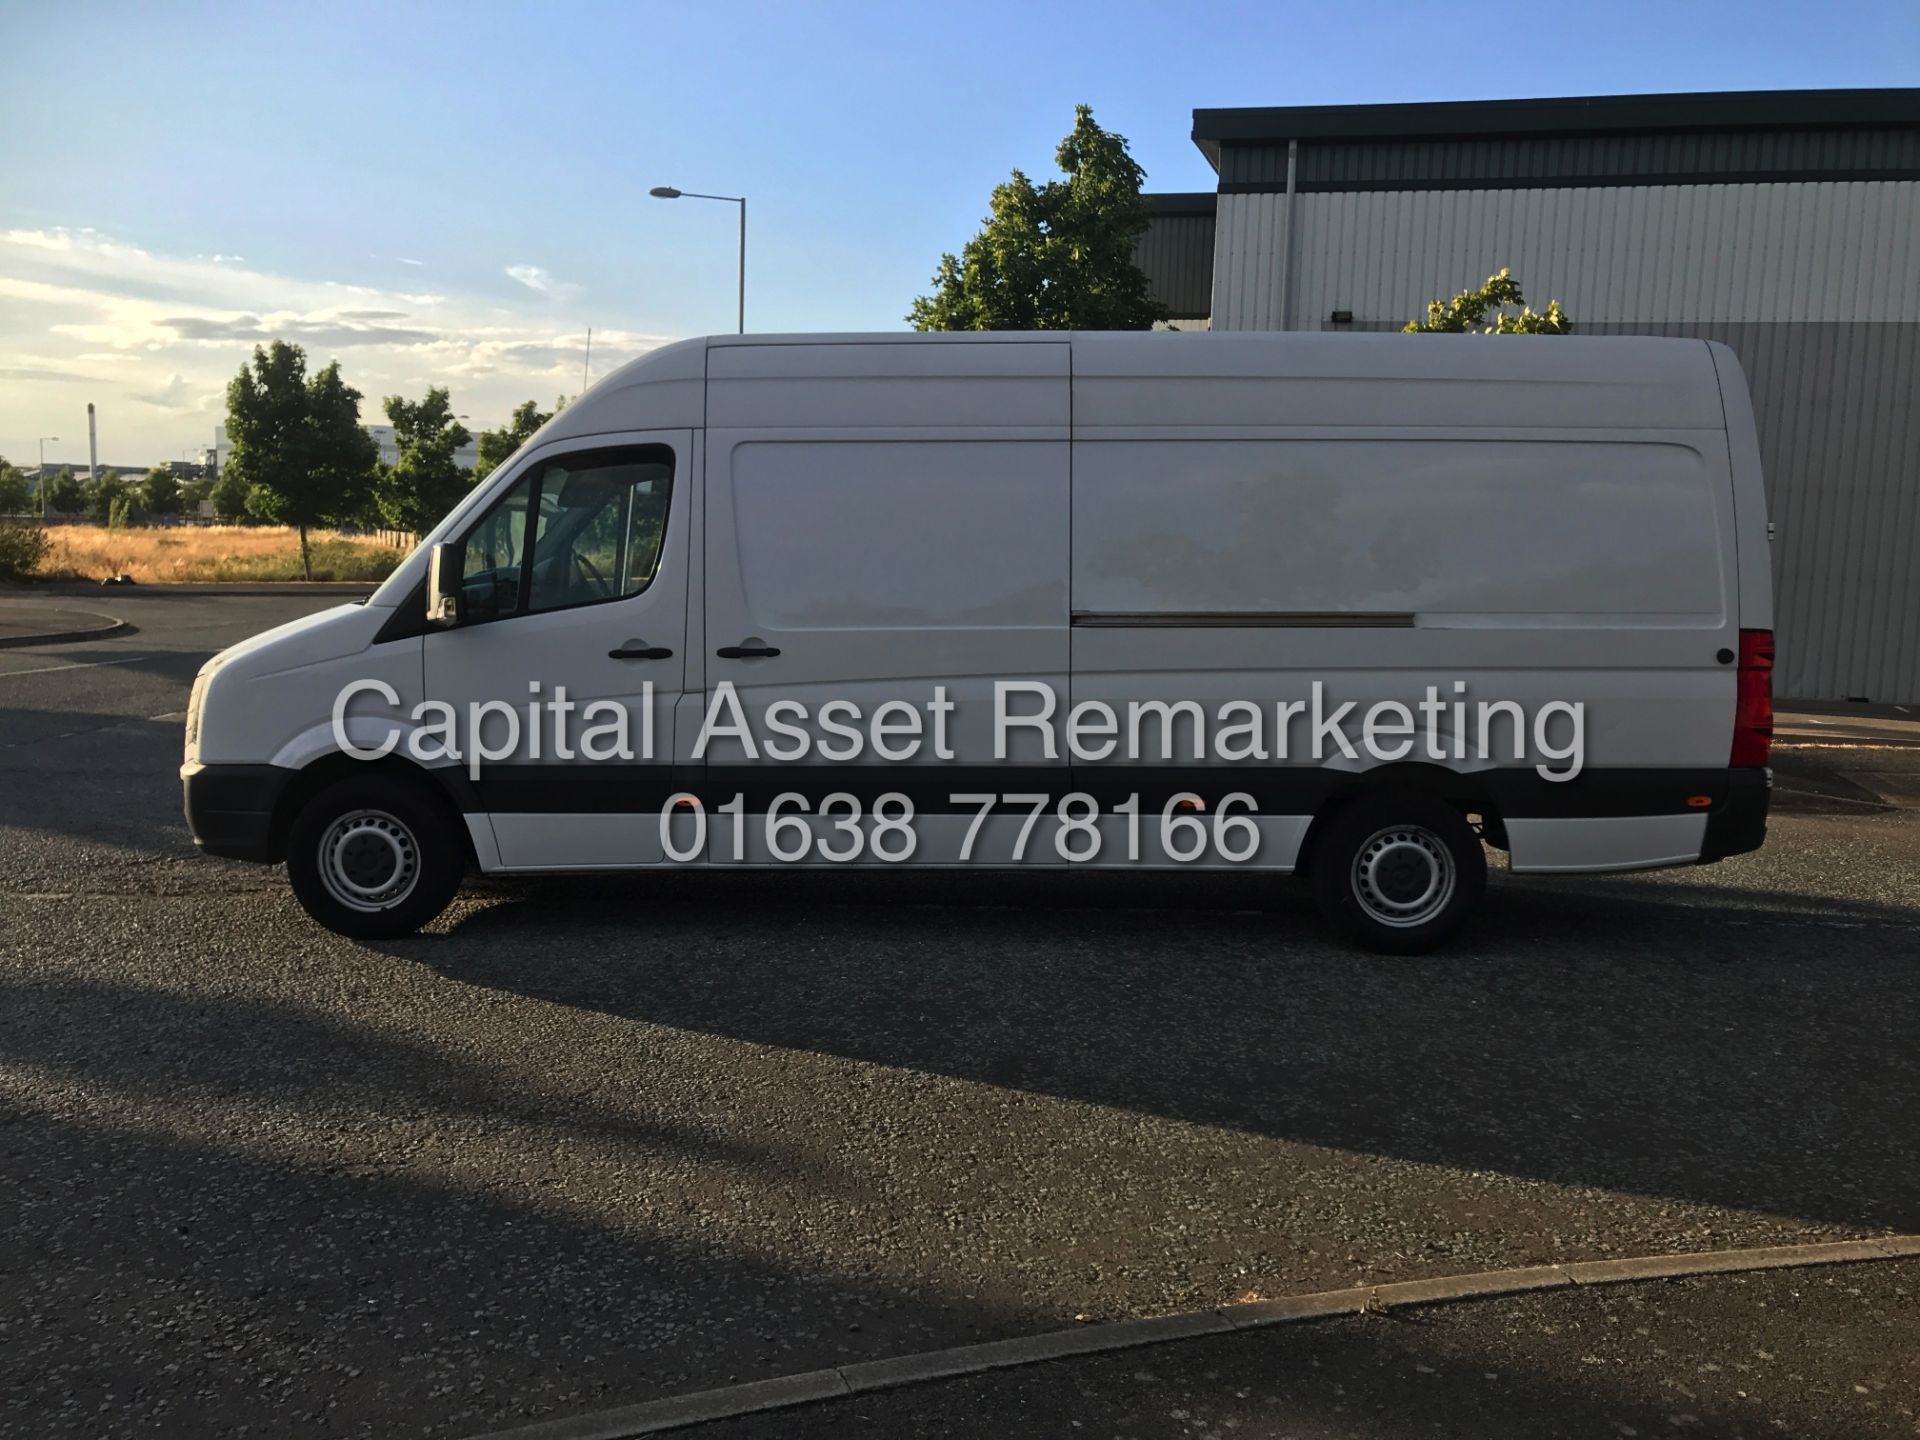 VOLKSWAGEN CRAFTER 2.0TDI LONG WHEEL BASE 4.2 MTR HIGH TOP - 2014 REG - 1 OWNER - SERVICE HISTORY - Image 12 of 18